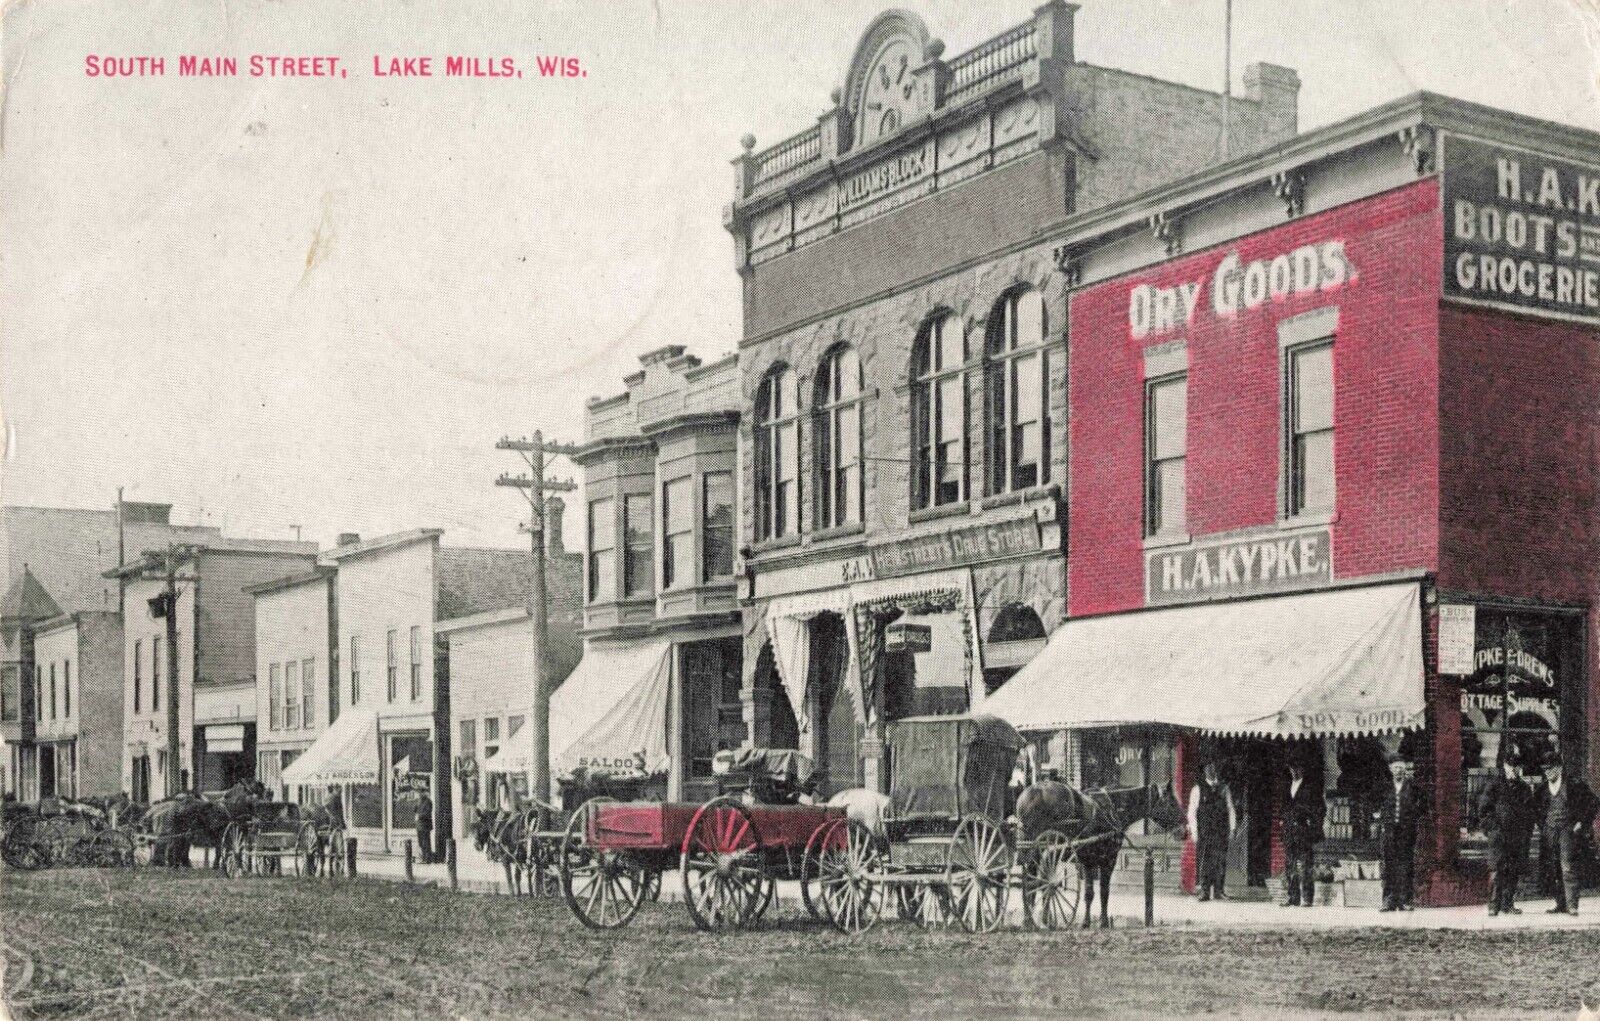 South Main Street Lake Mills Wisconsin WI Dry Goods Drug Store 1910 Postcard